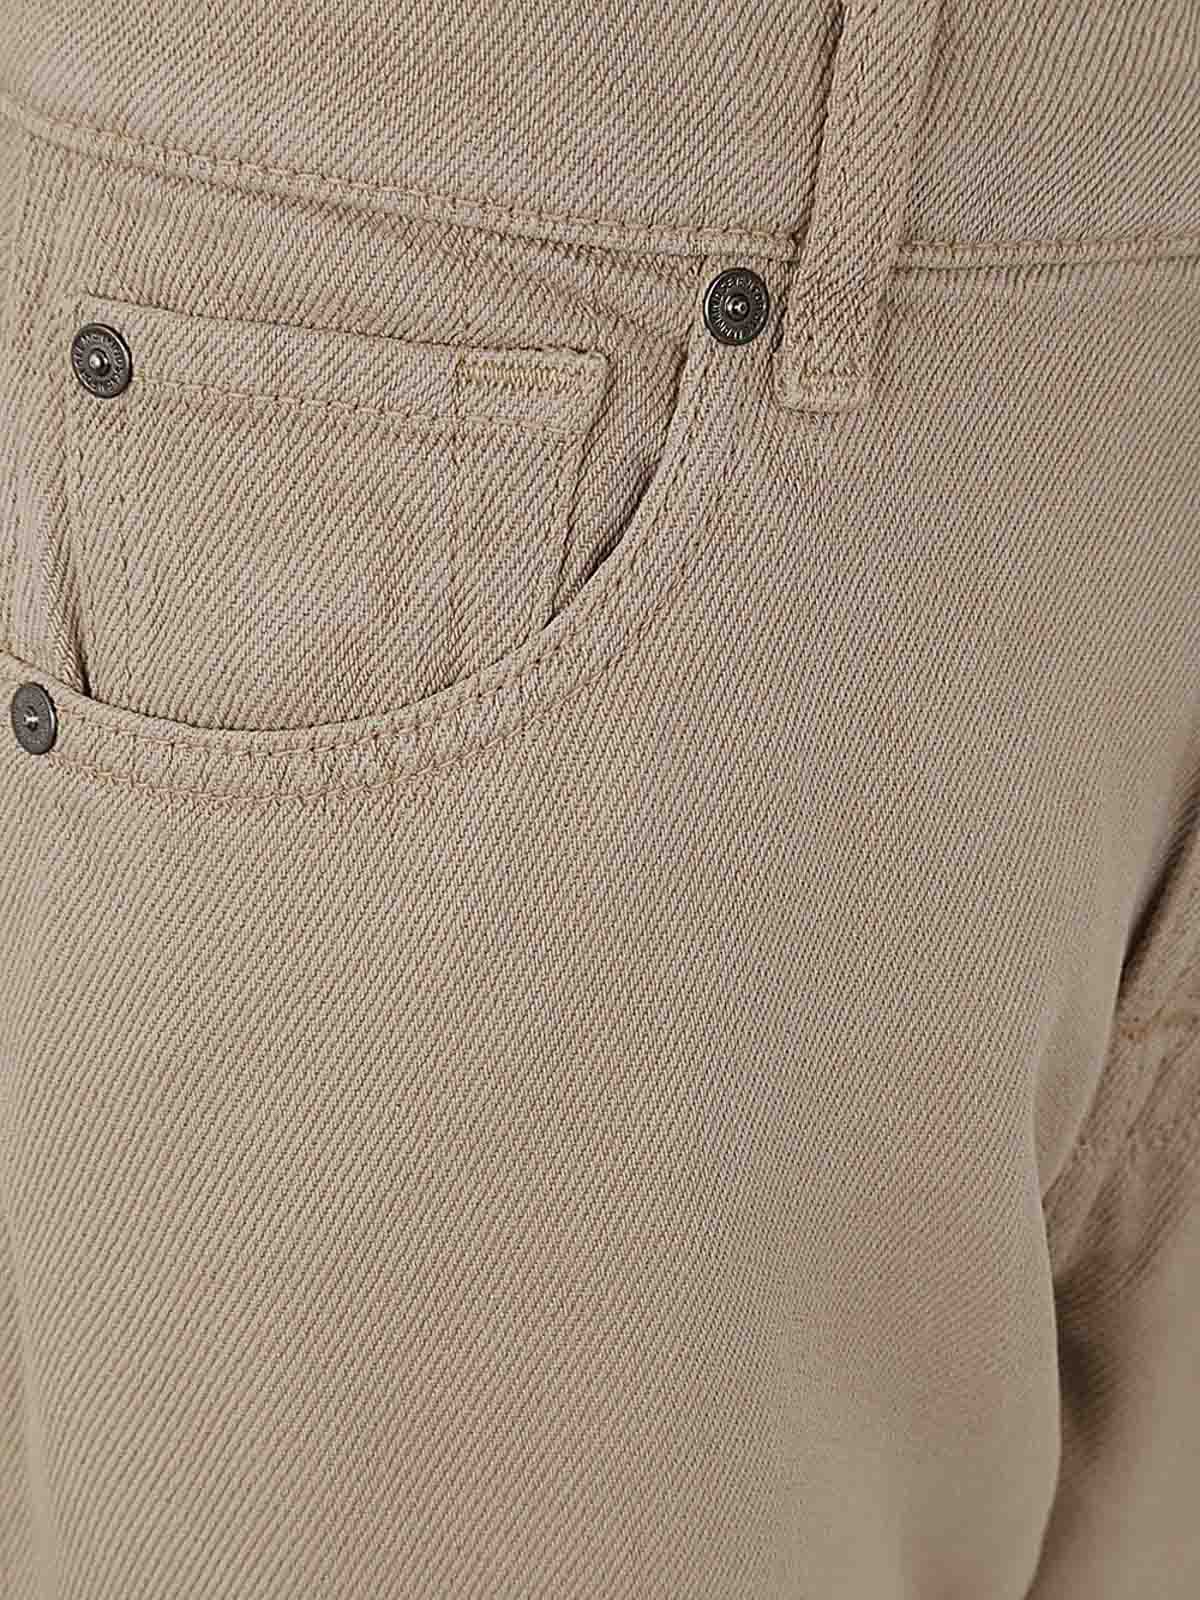 Shop 7 For All Mankind Shorts - Tess In Brown